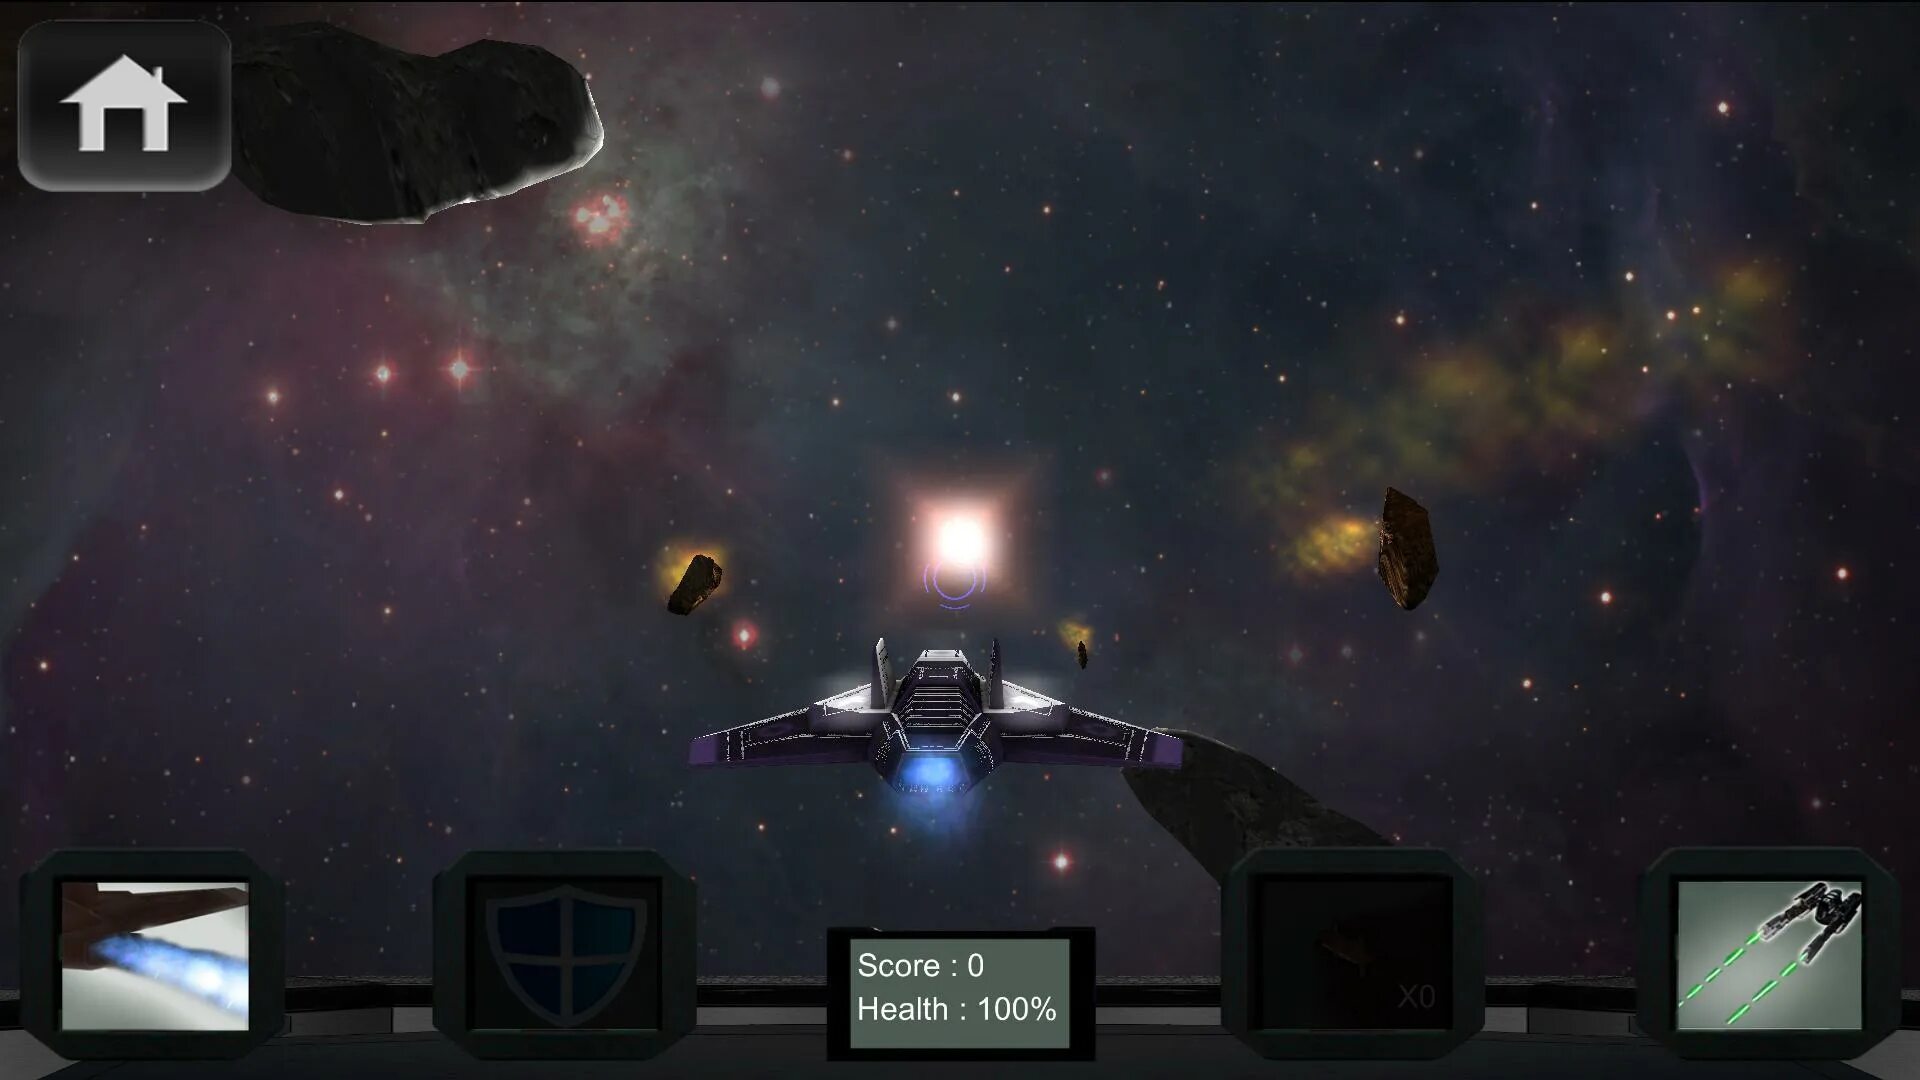 Space demo. Space Fighter игра. Shoot 'em up космос истребитель. Endless Space Android. Last Space Fighter.